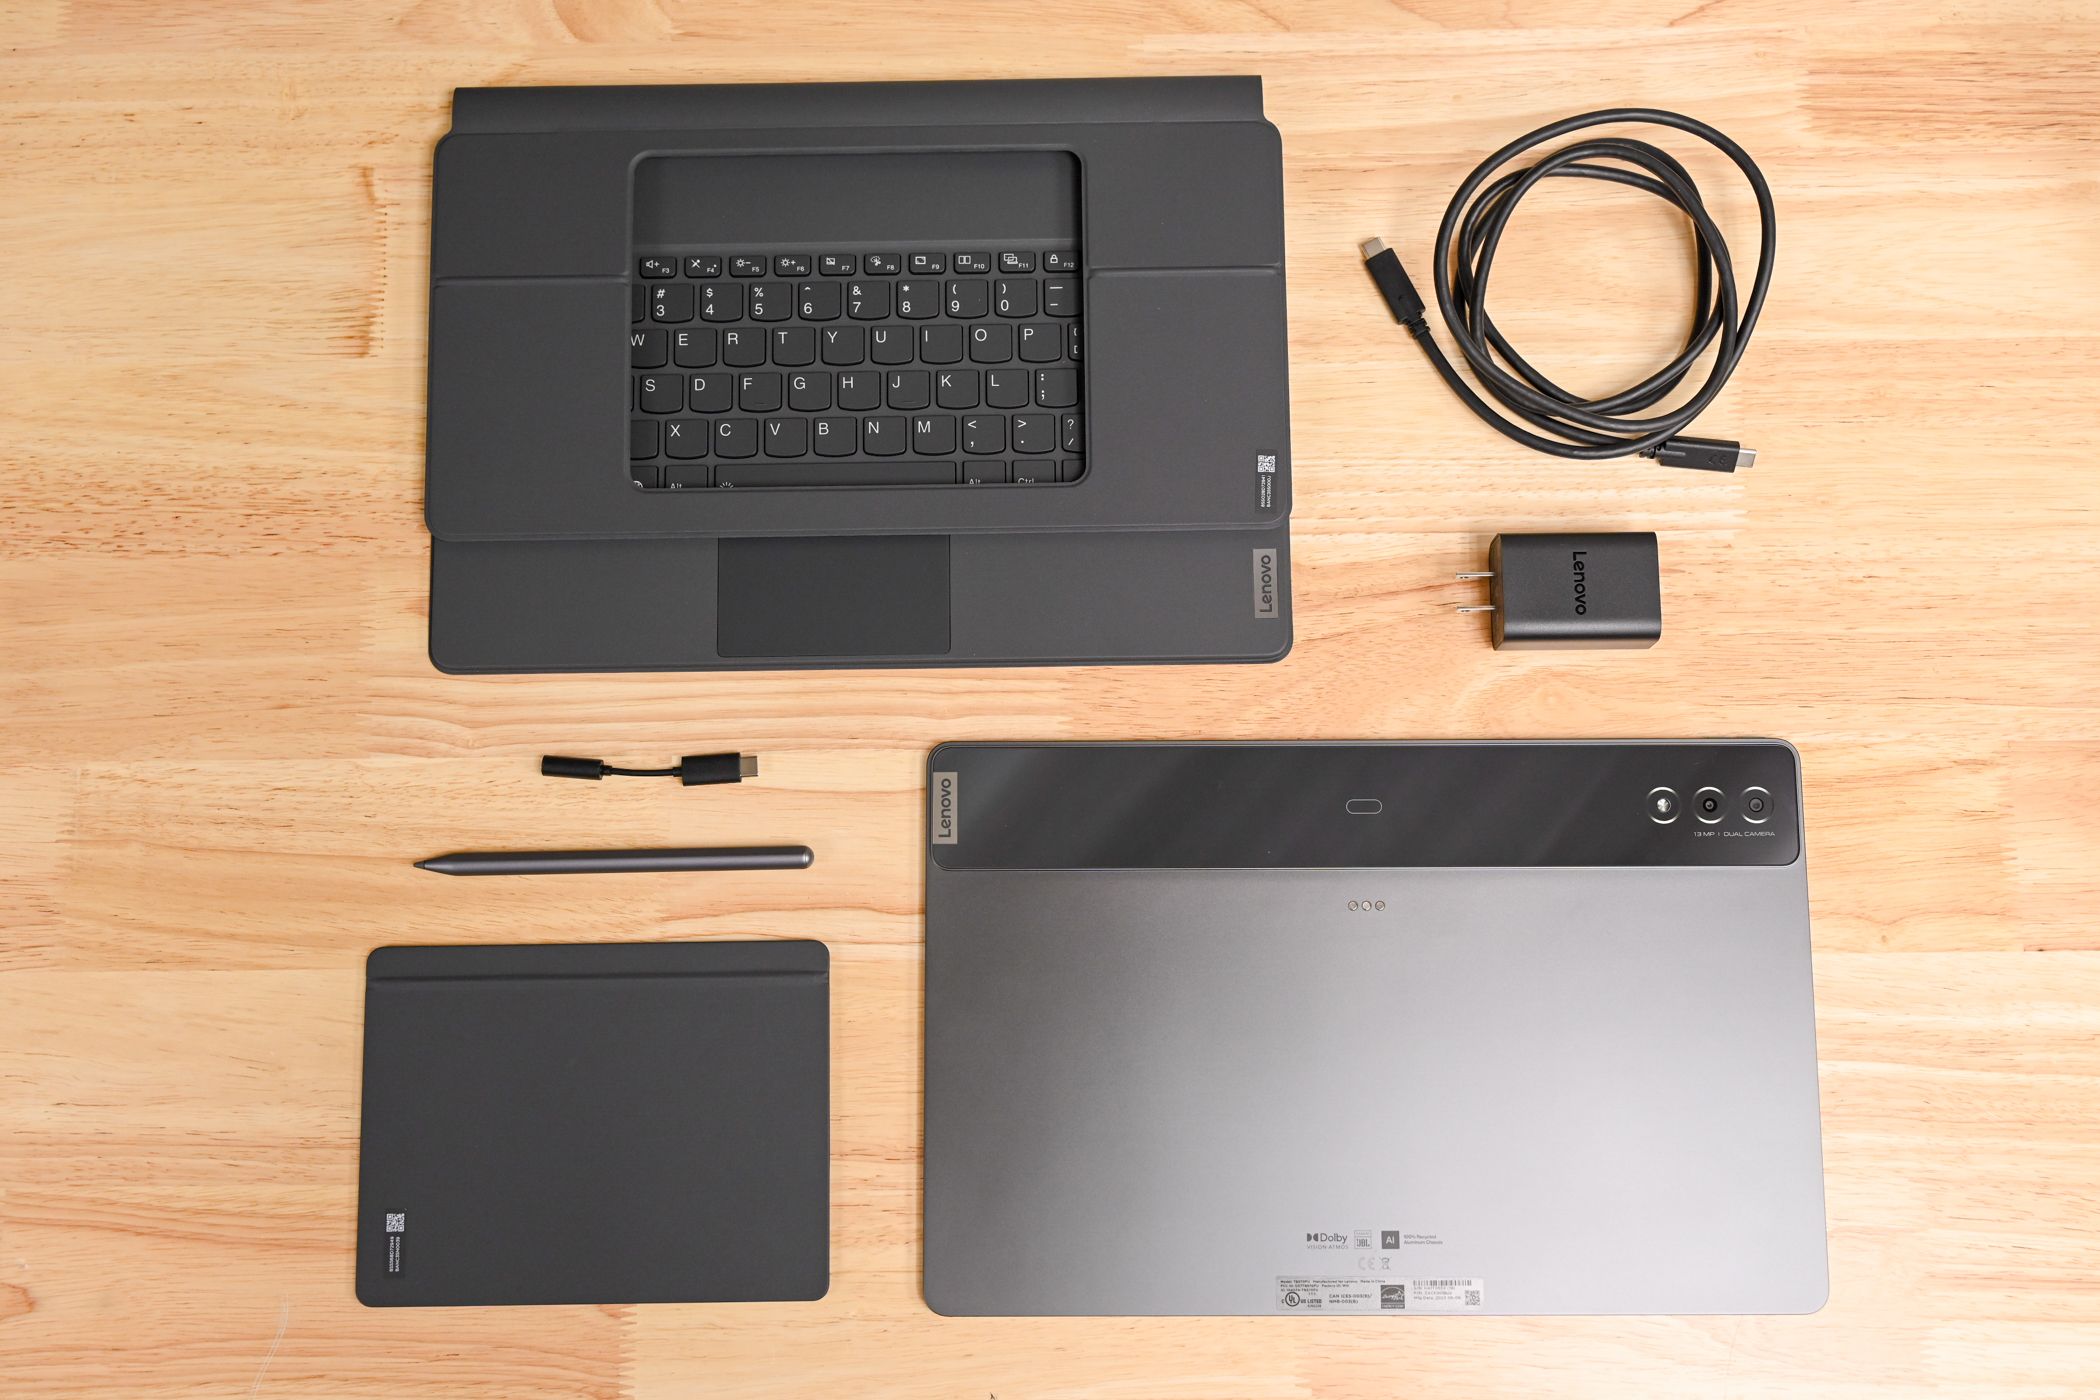 Components and accessories for the Lenovo Tab Extreme.